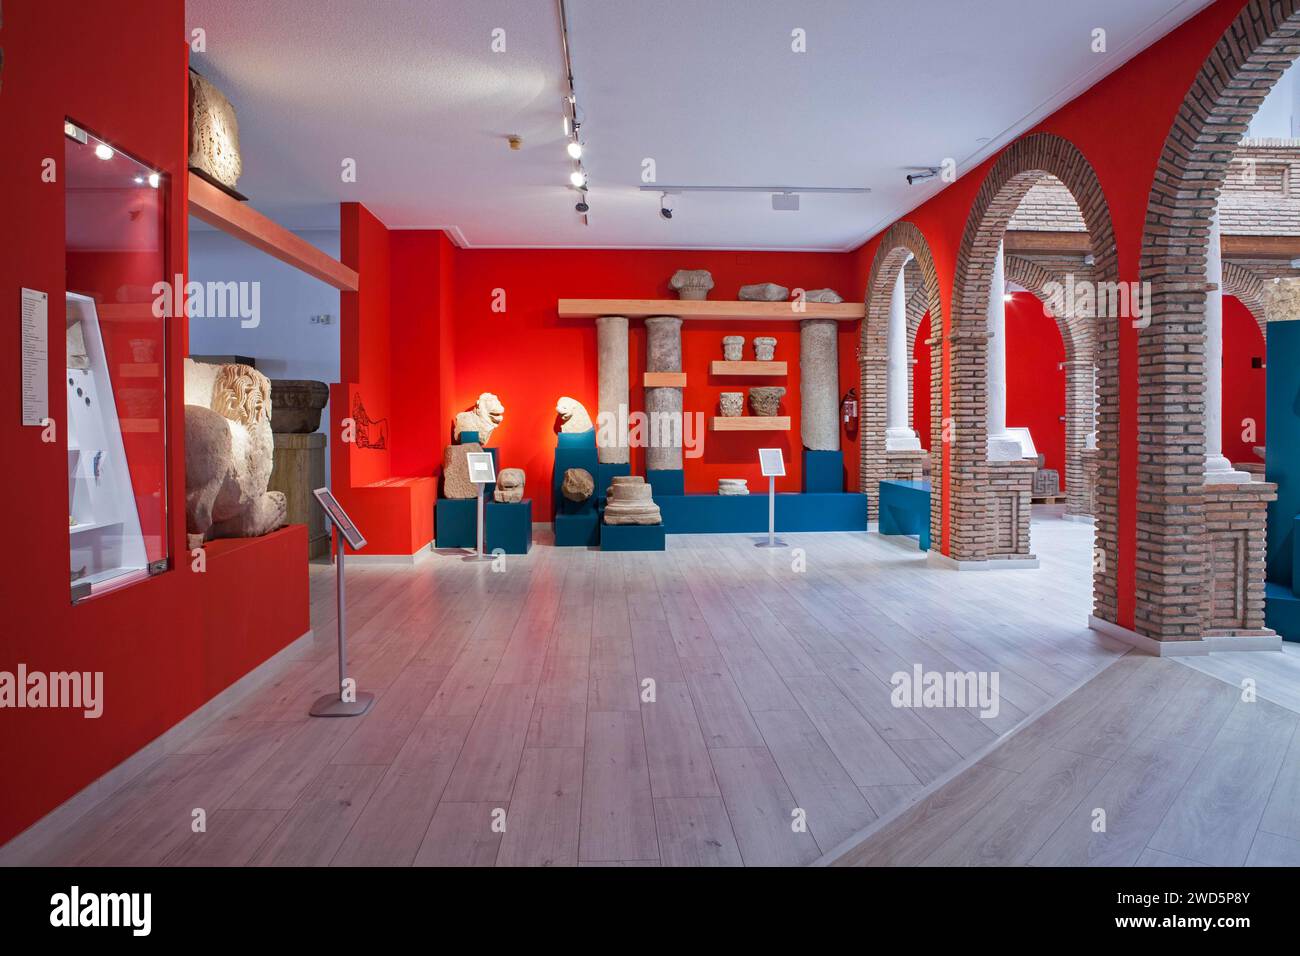 Exhibition rooms for Castulo roman village pieces, archeological museum of Linares, Jaen province, Spain Stock Photo